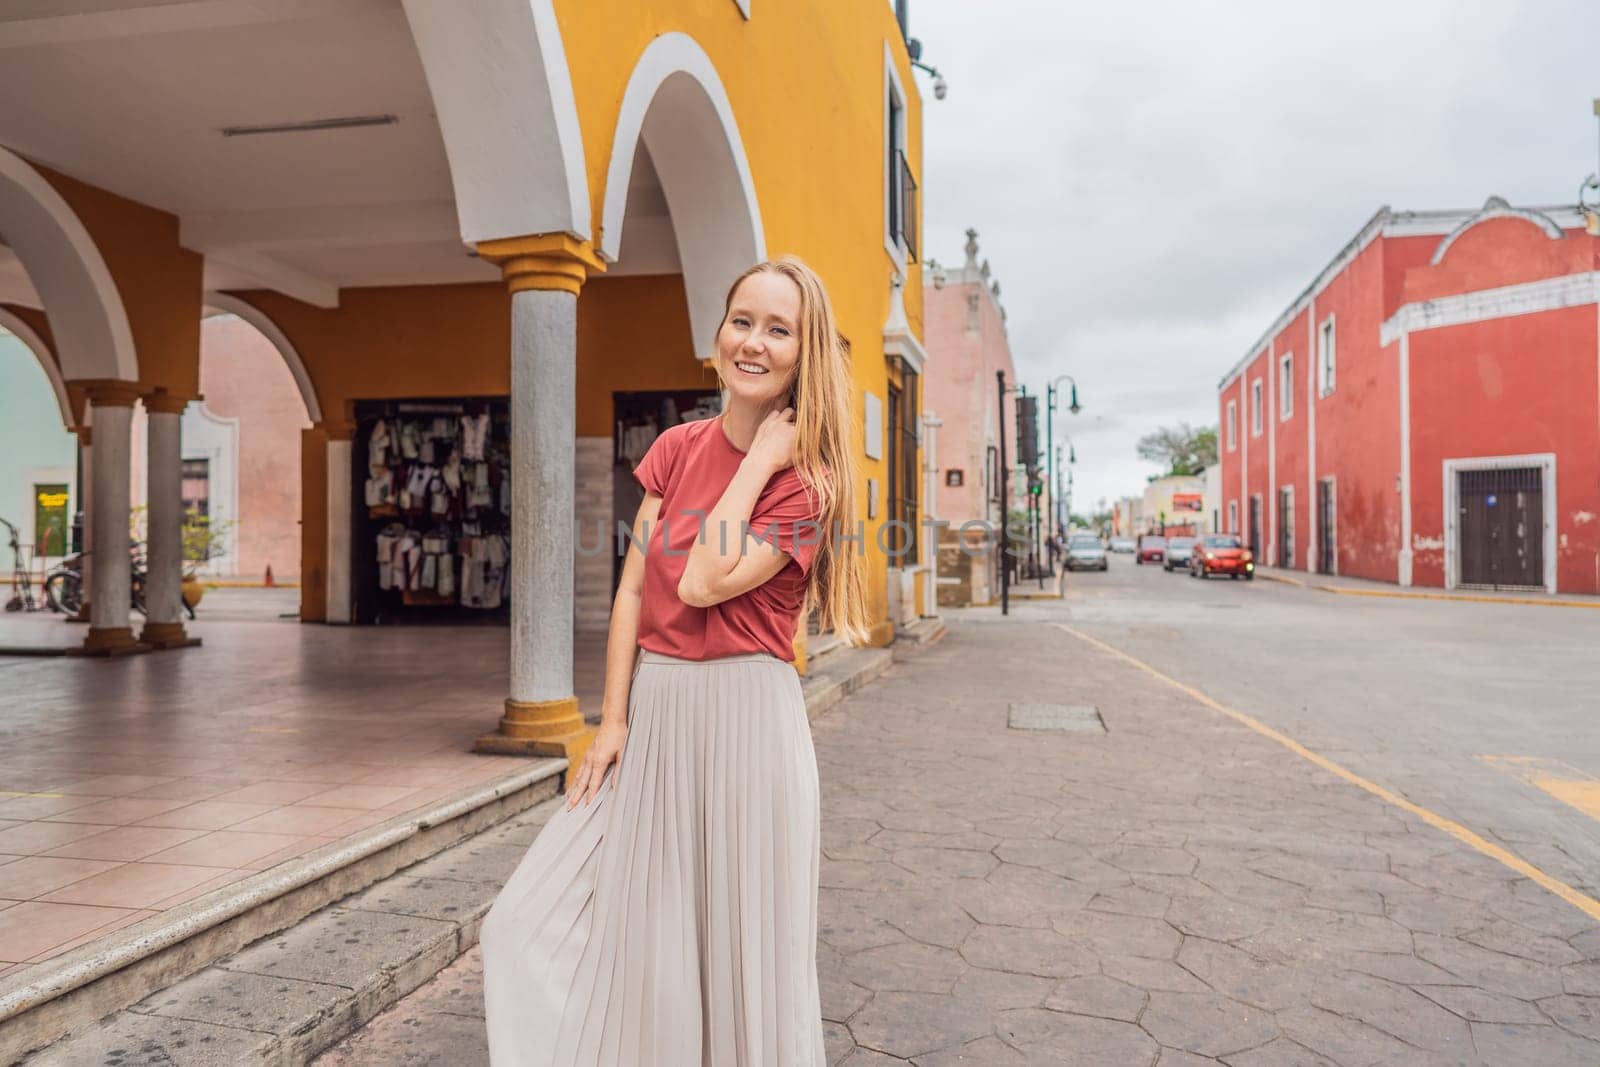 Woman tourist explores the vibrant streets of Valladolid, Mexico, immersing herself in the rich culture and colorful architecture of this charming colonial town by galitskaya